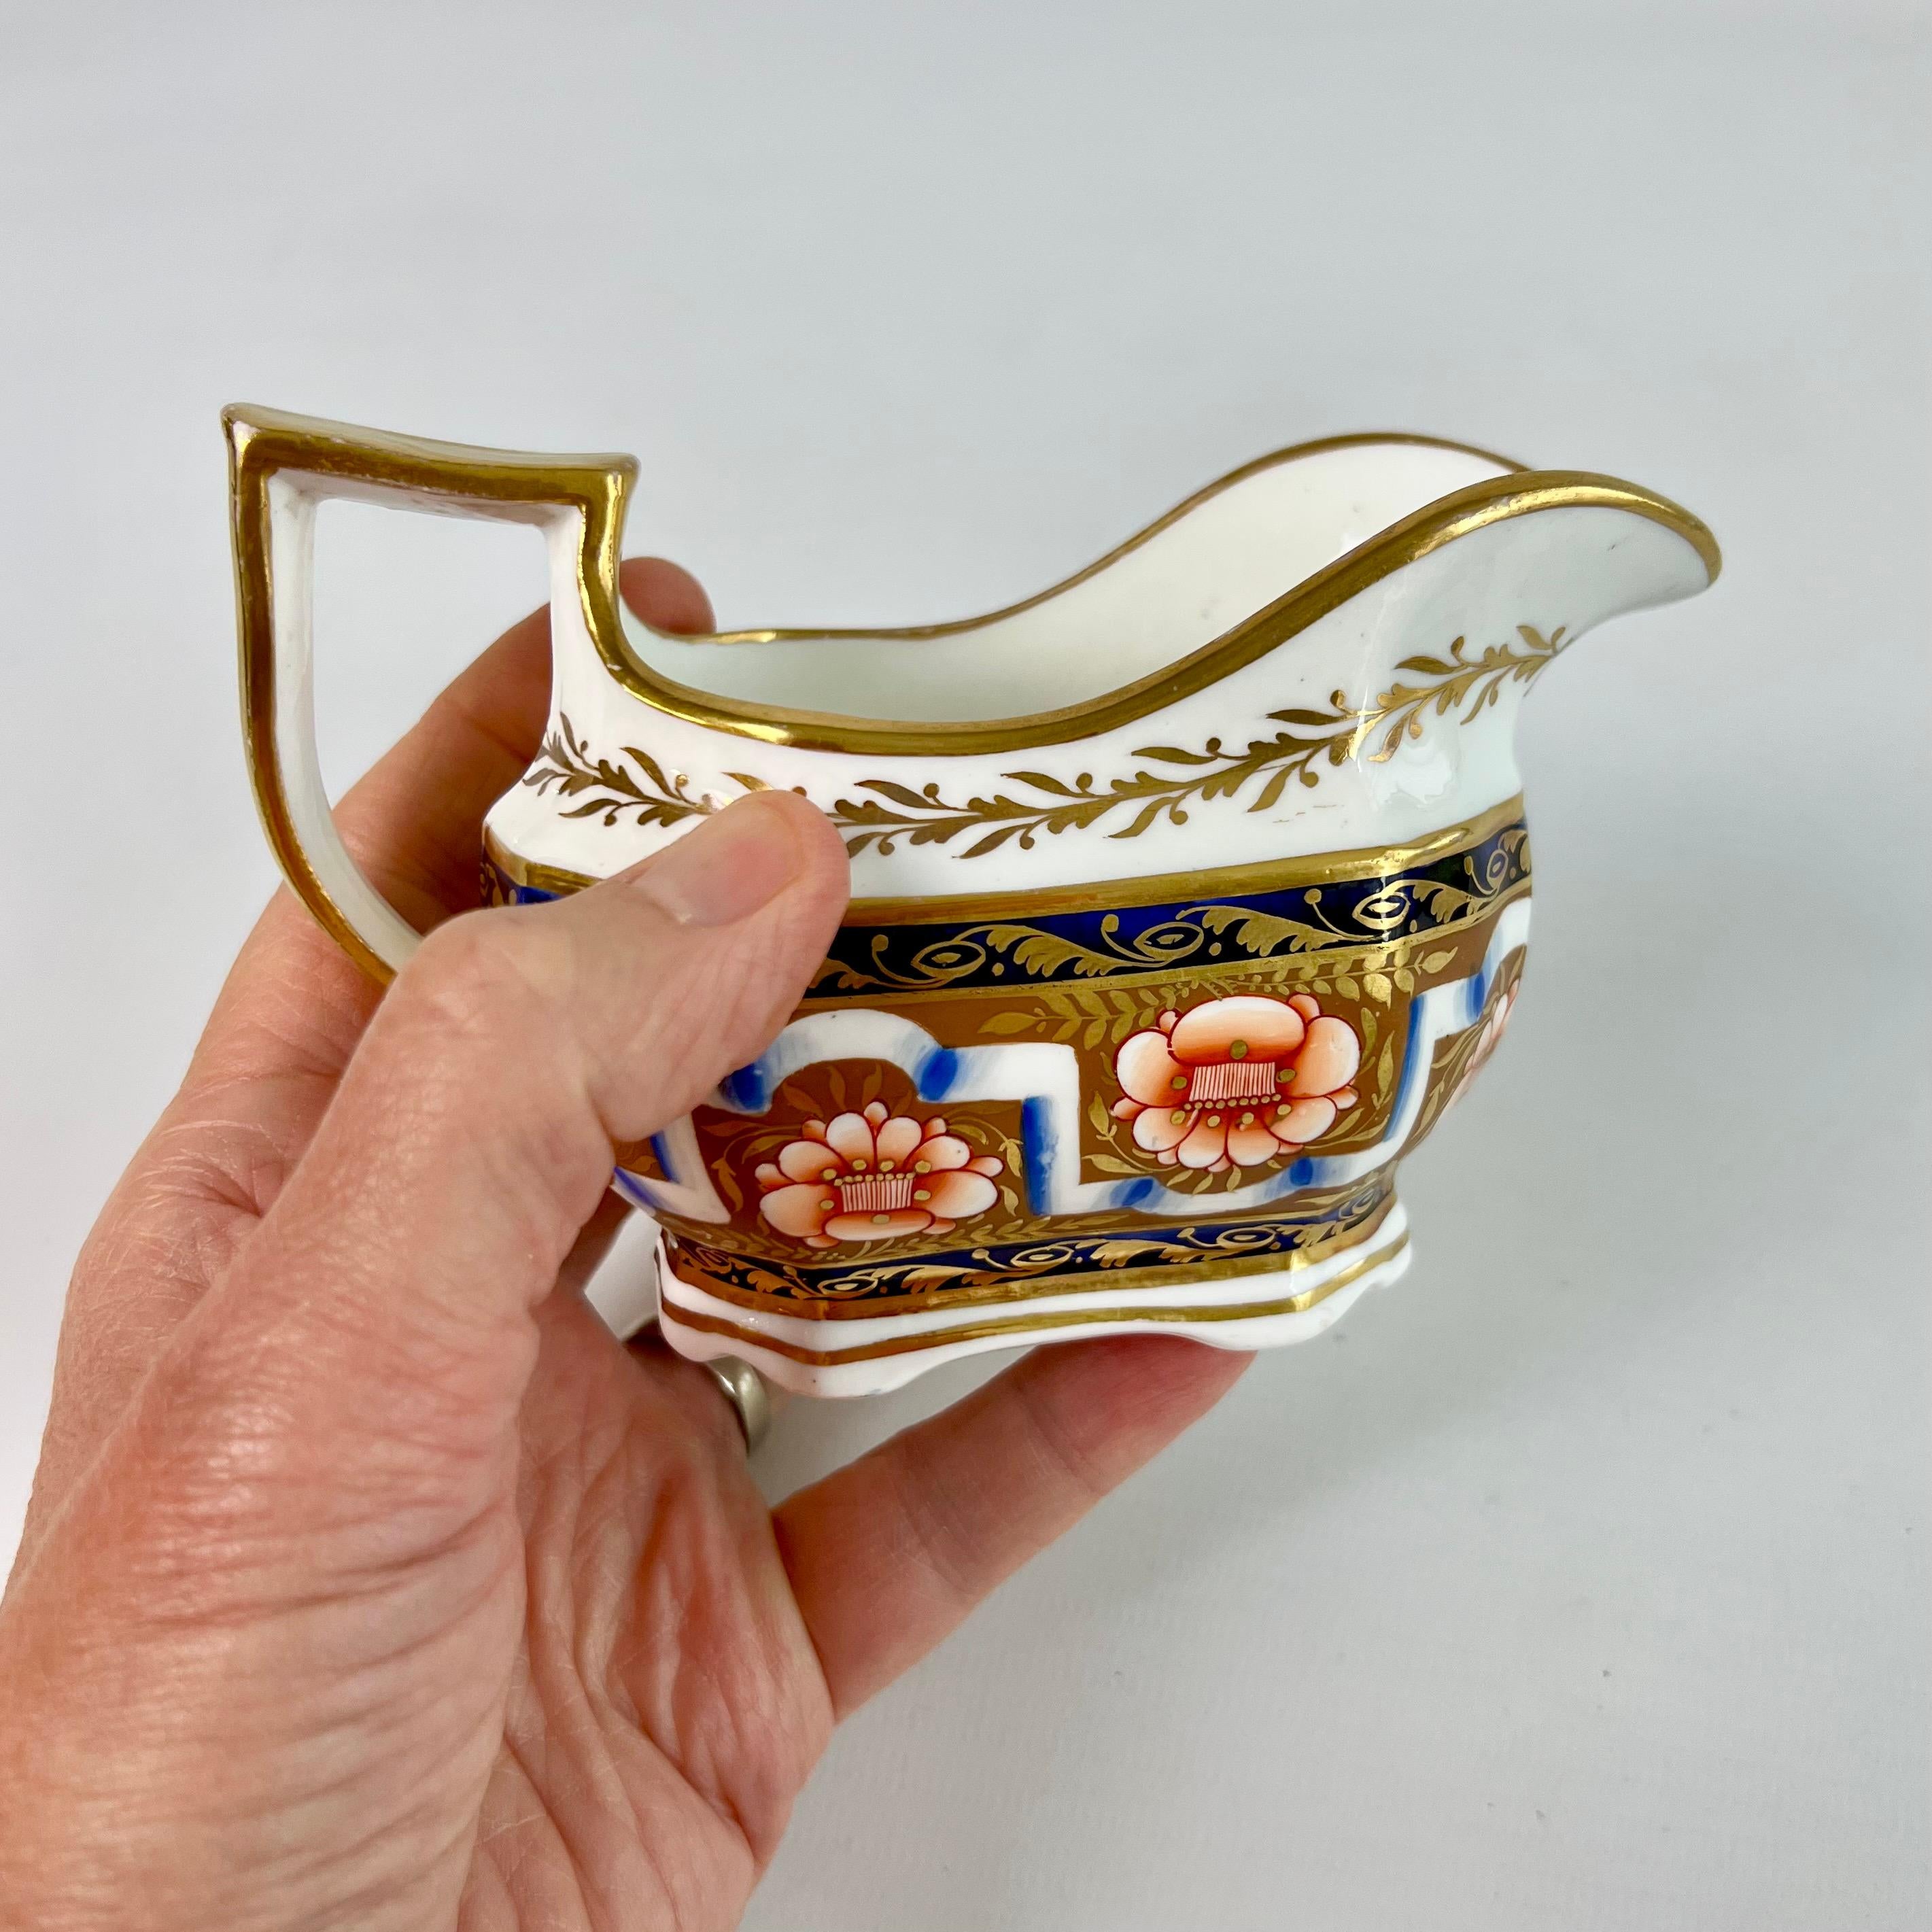 This is a beautiful milk jug or creamer made by Spode around 1825. The jug is decorated in a beautiful Neoclassical pattern in Imari colours and has a characteristic serpent handle. It has provenance: it came from the famous Solomon Andrews